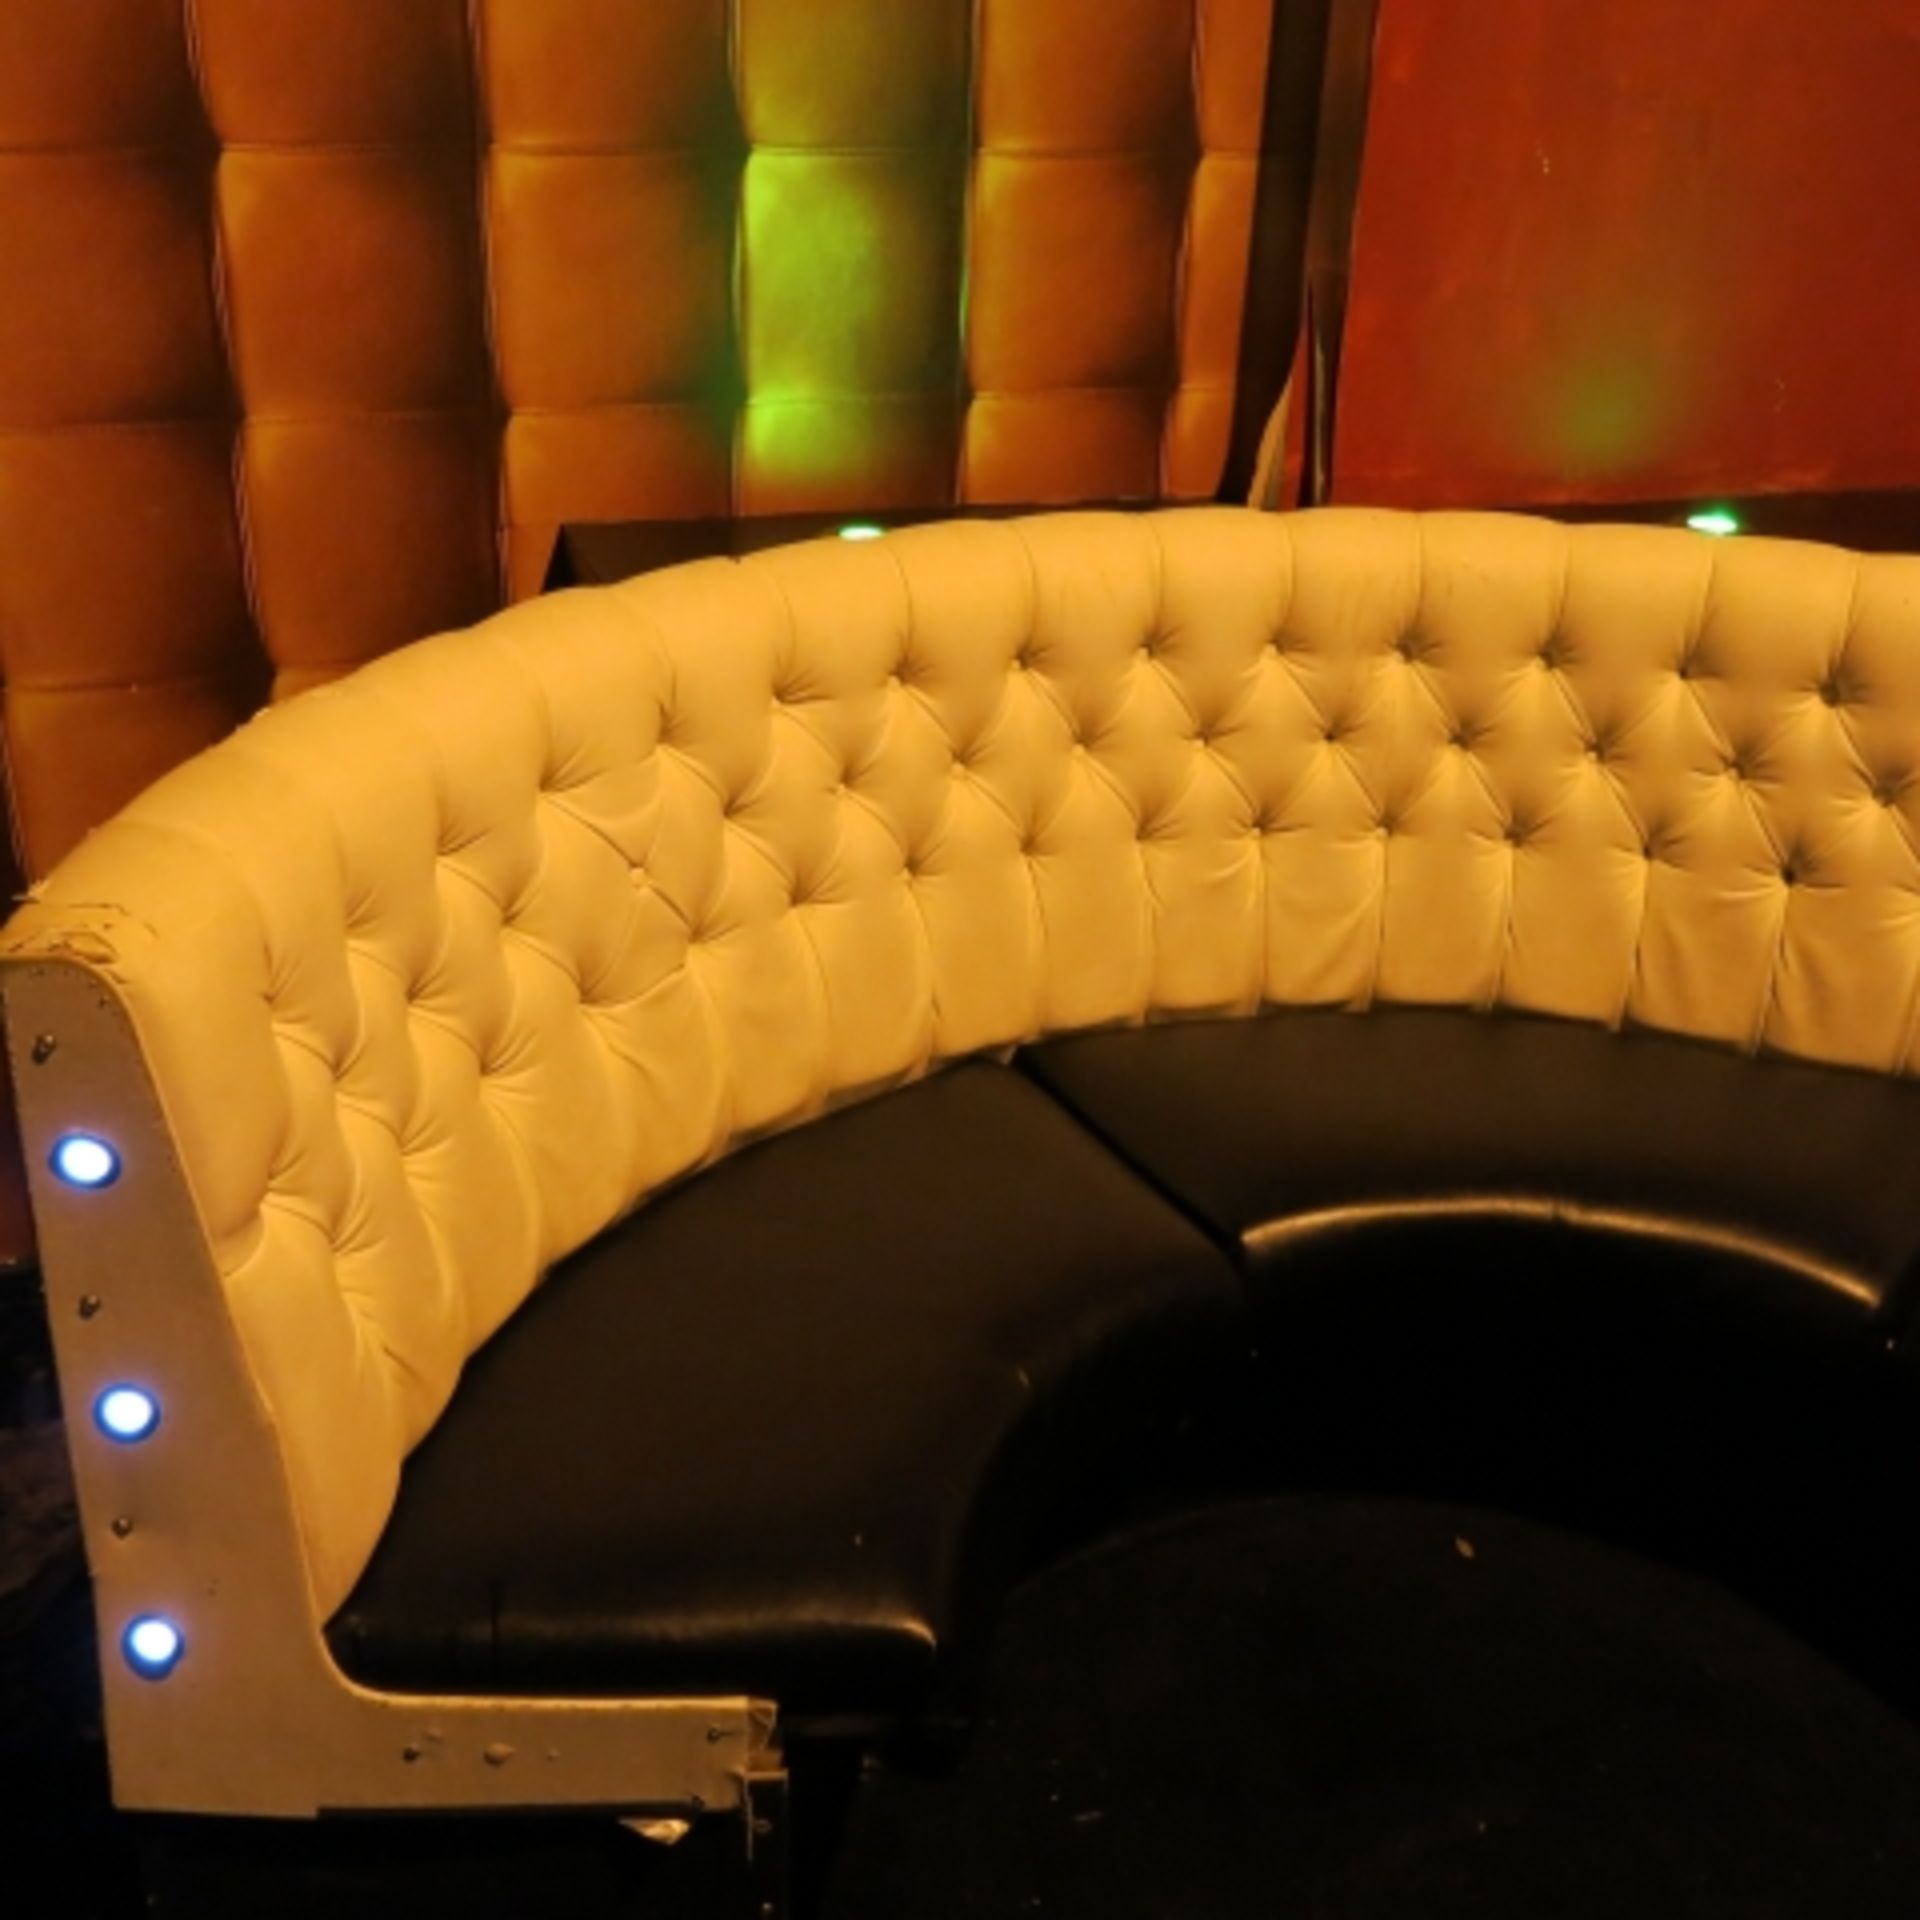 Cream Circular Button Back Seating Unit c/w 6 Spot Light Built in Unit, some damage. - Image 3 of 4